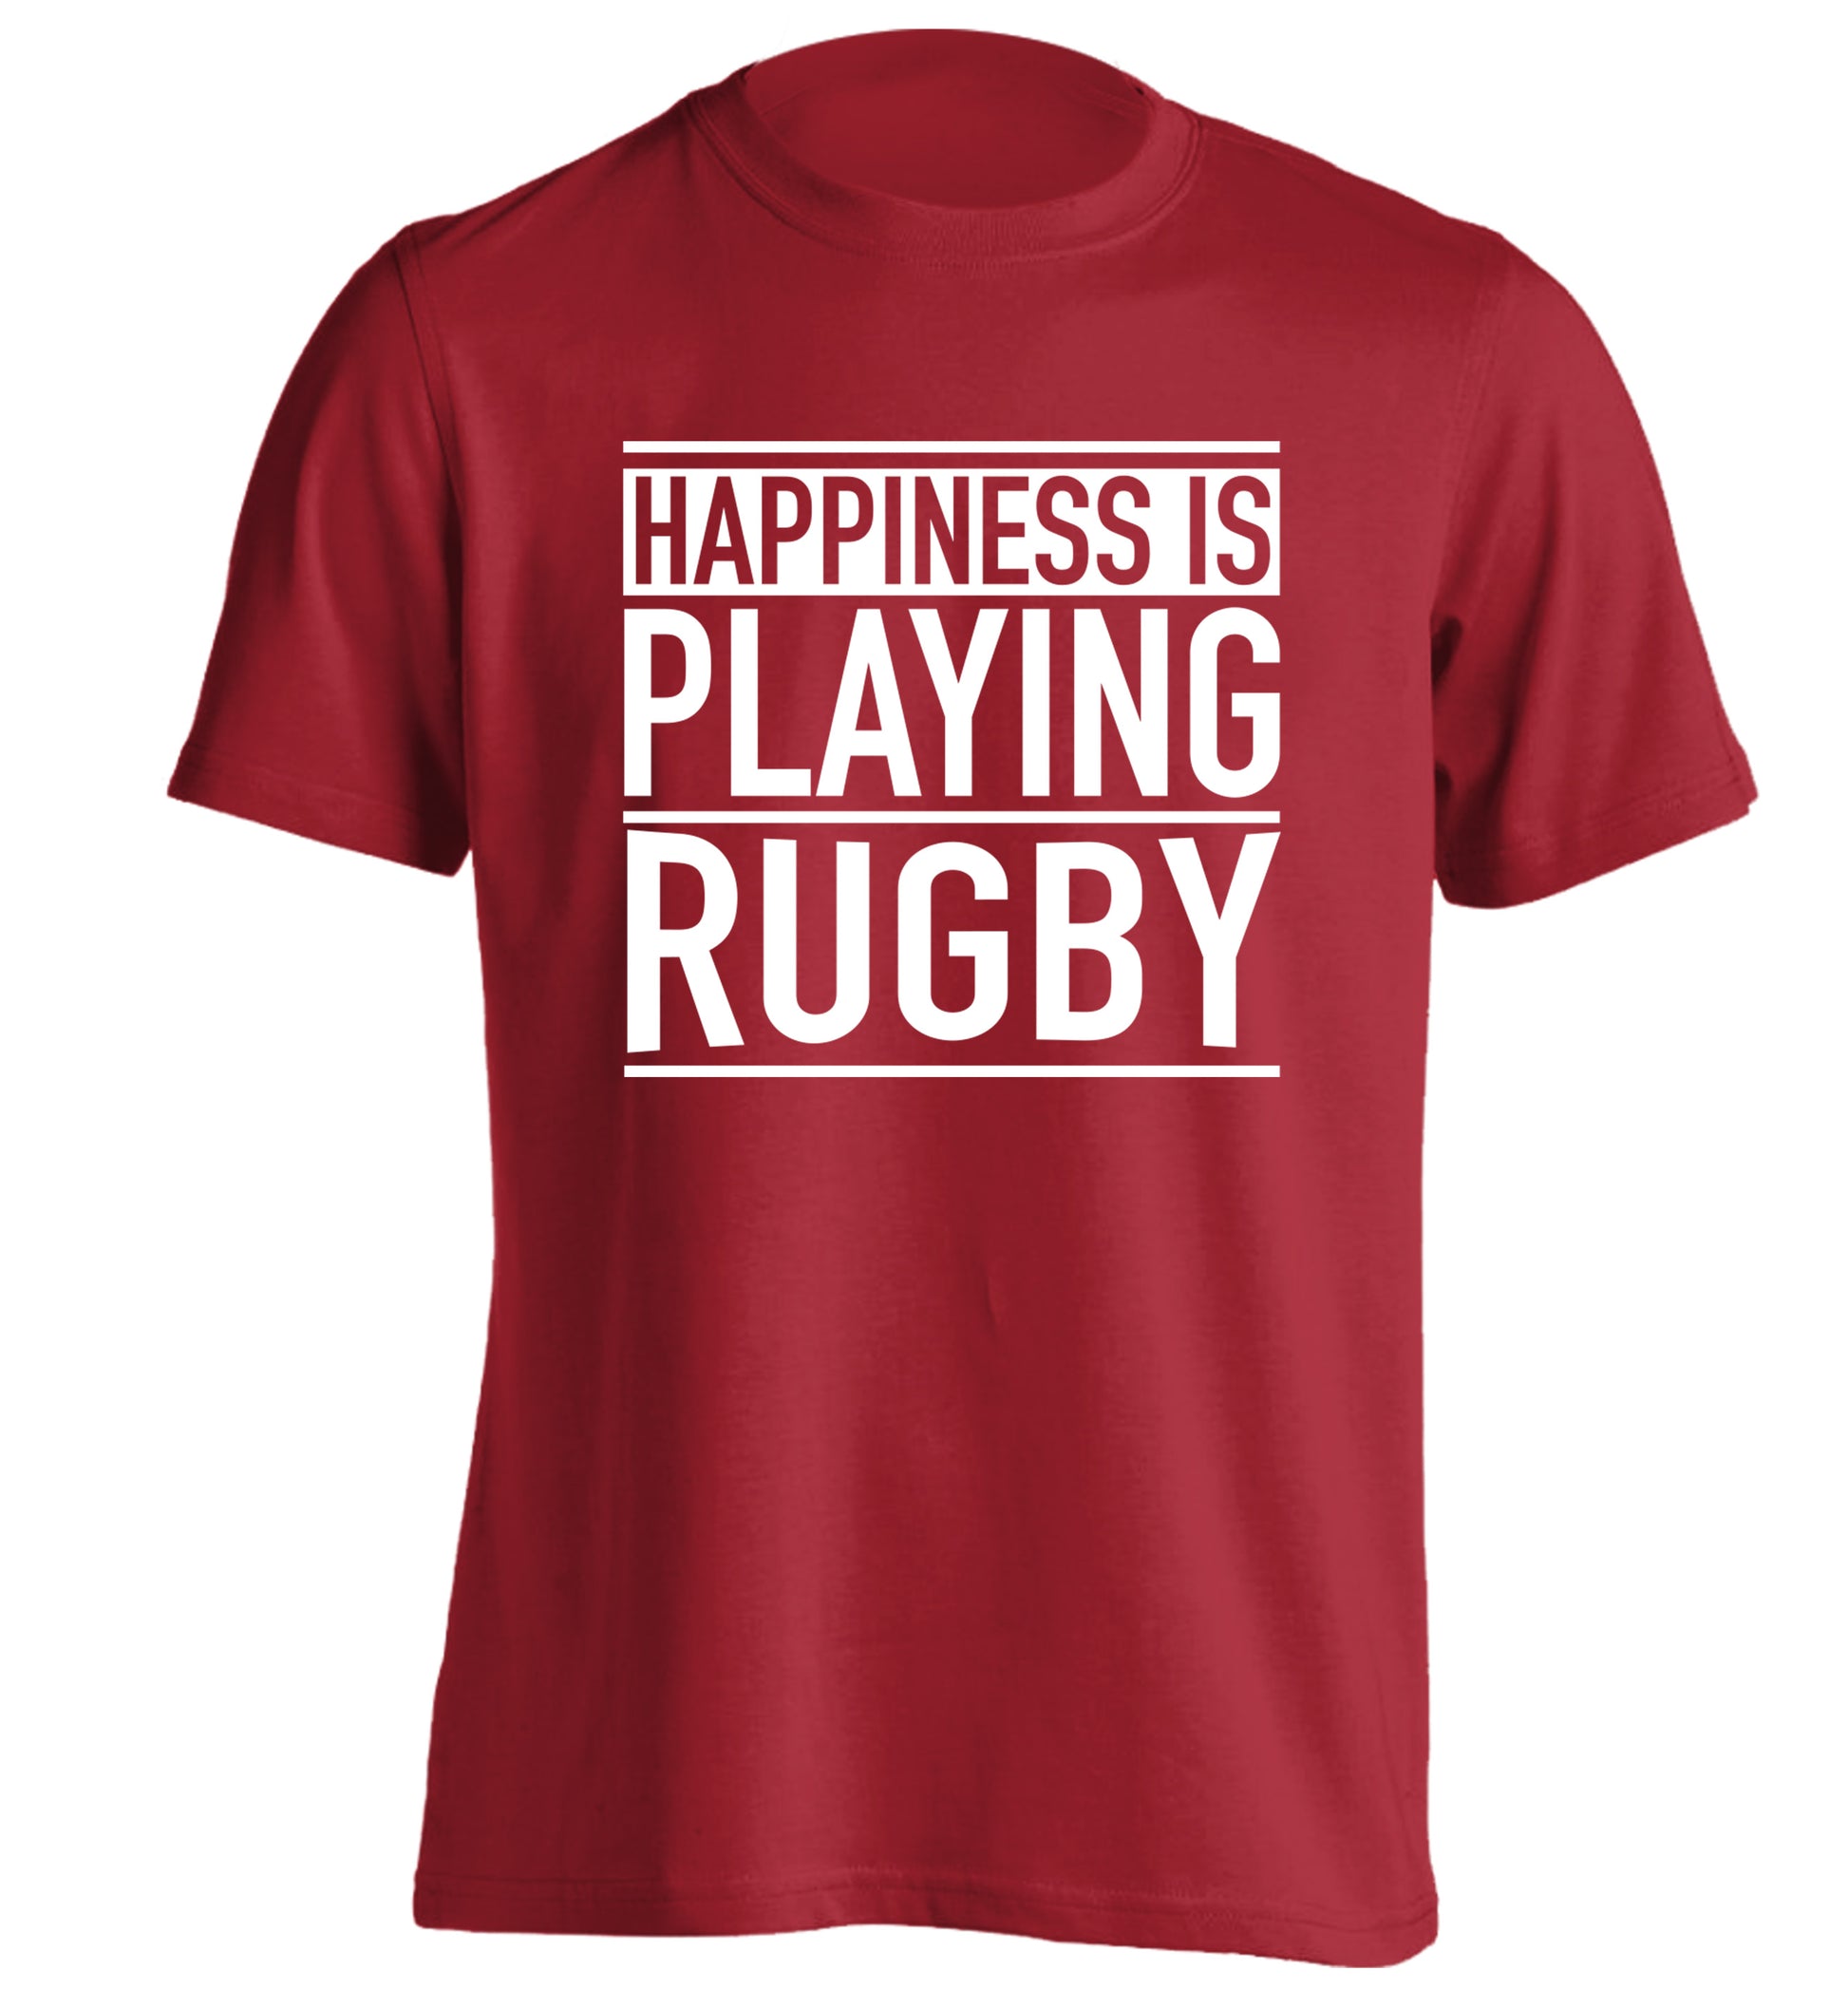 Happiness is playing rugby adults unisex red Tshirt 2XL